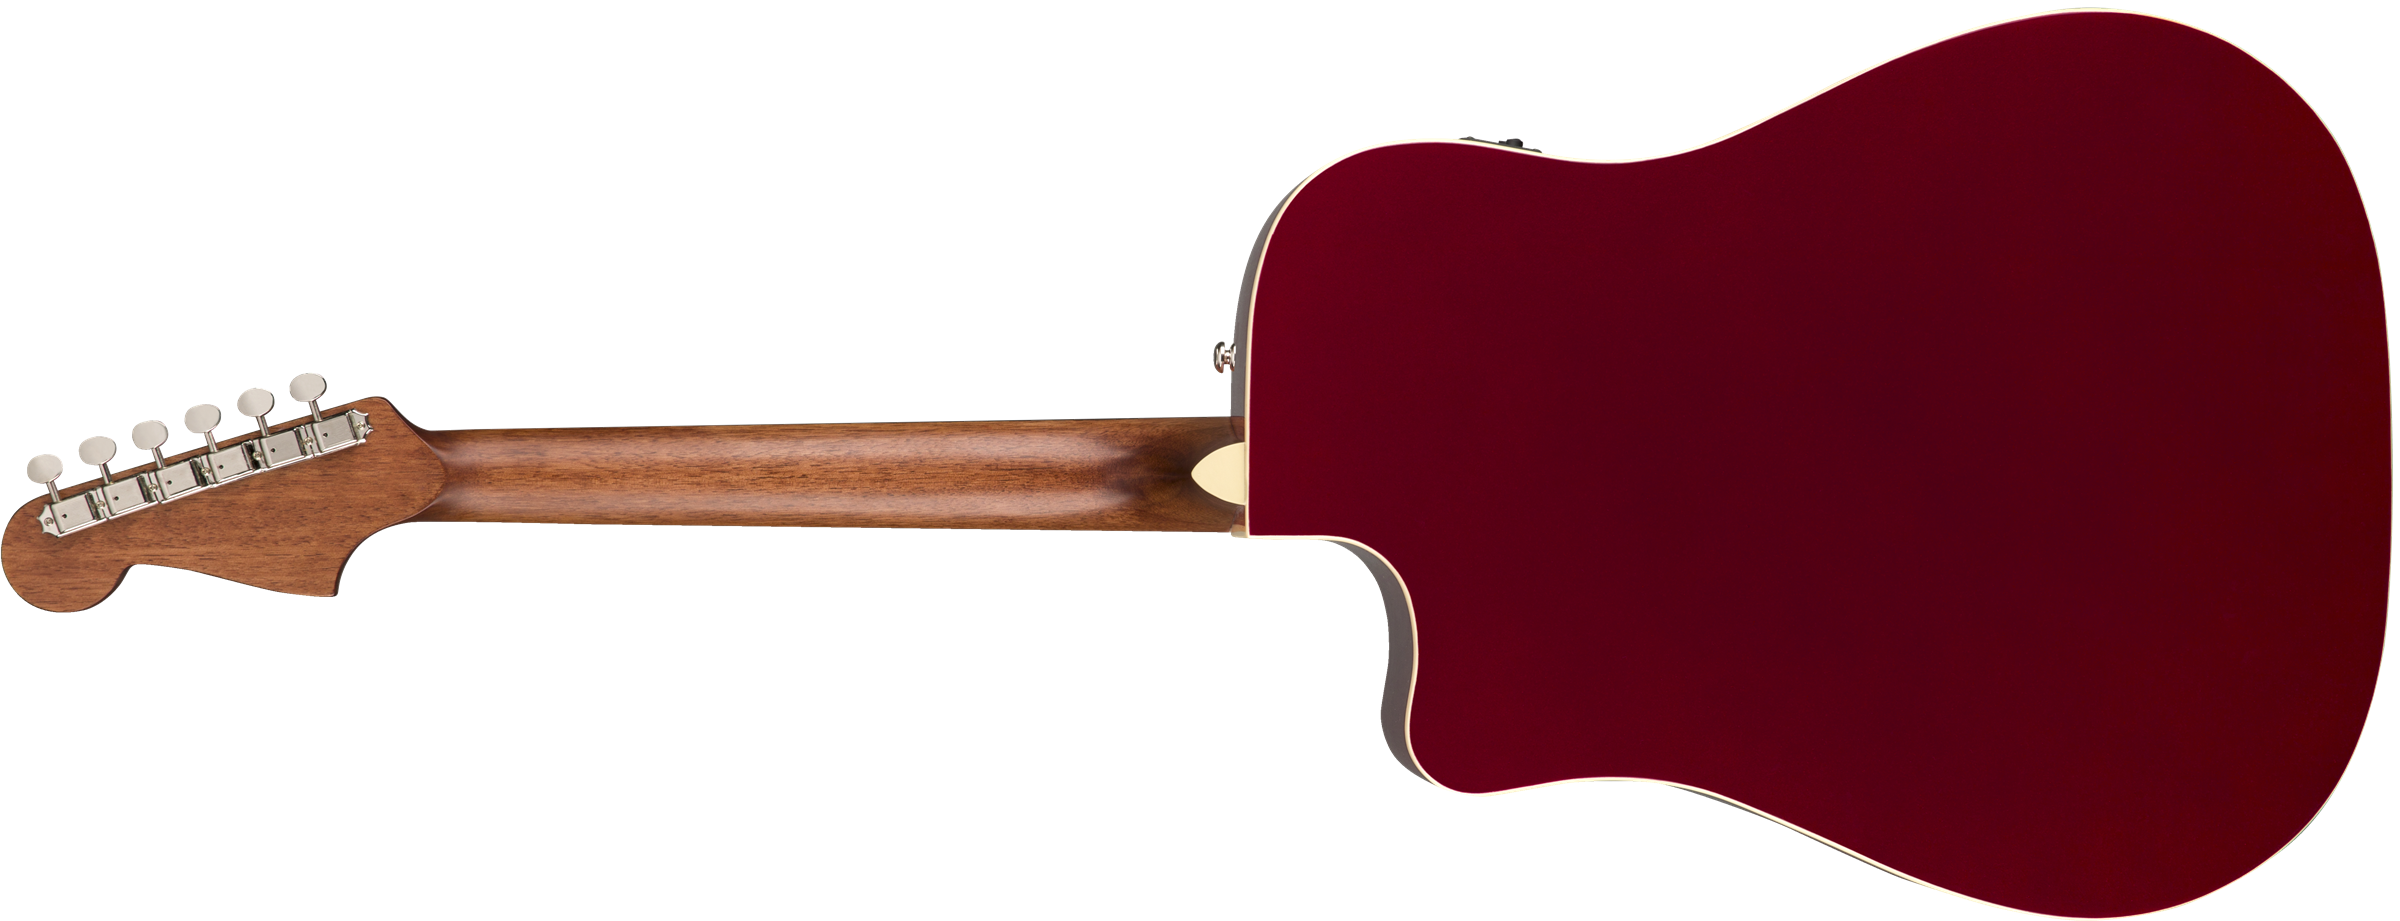 Fender Redondo Player - Candy Apple Red - Westerngitarre & electro - Variation 6